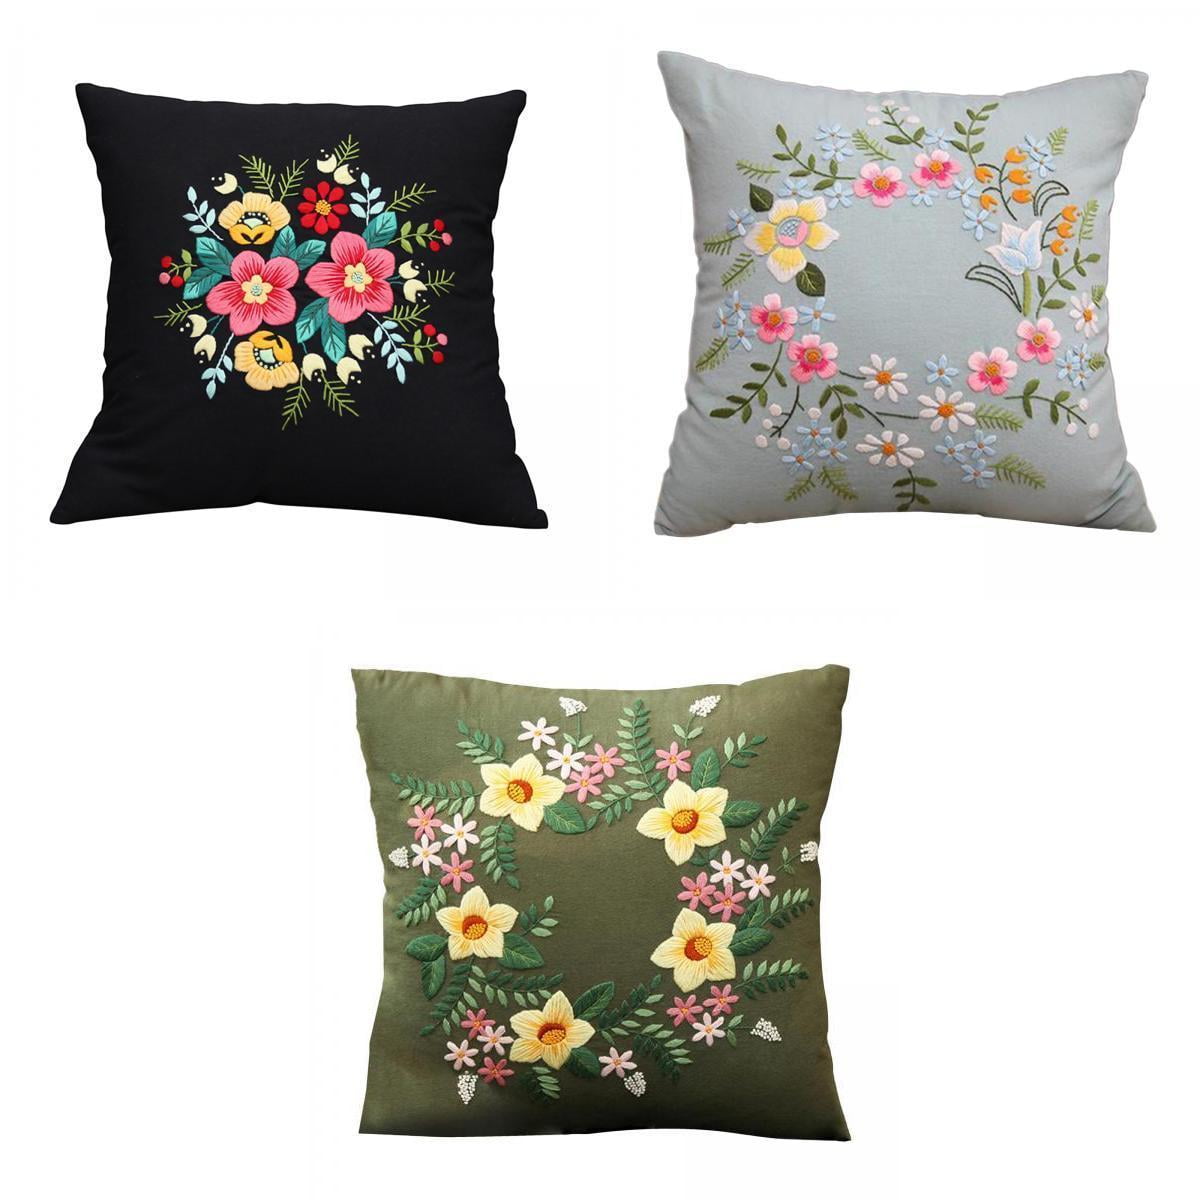 Untitled Bedtick Dangerous Flower Illustration Embroidery Pillow Punch Needle Art Pillow Cover Decorative Sofa Cushion